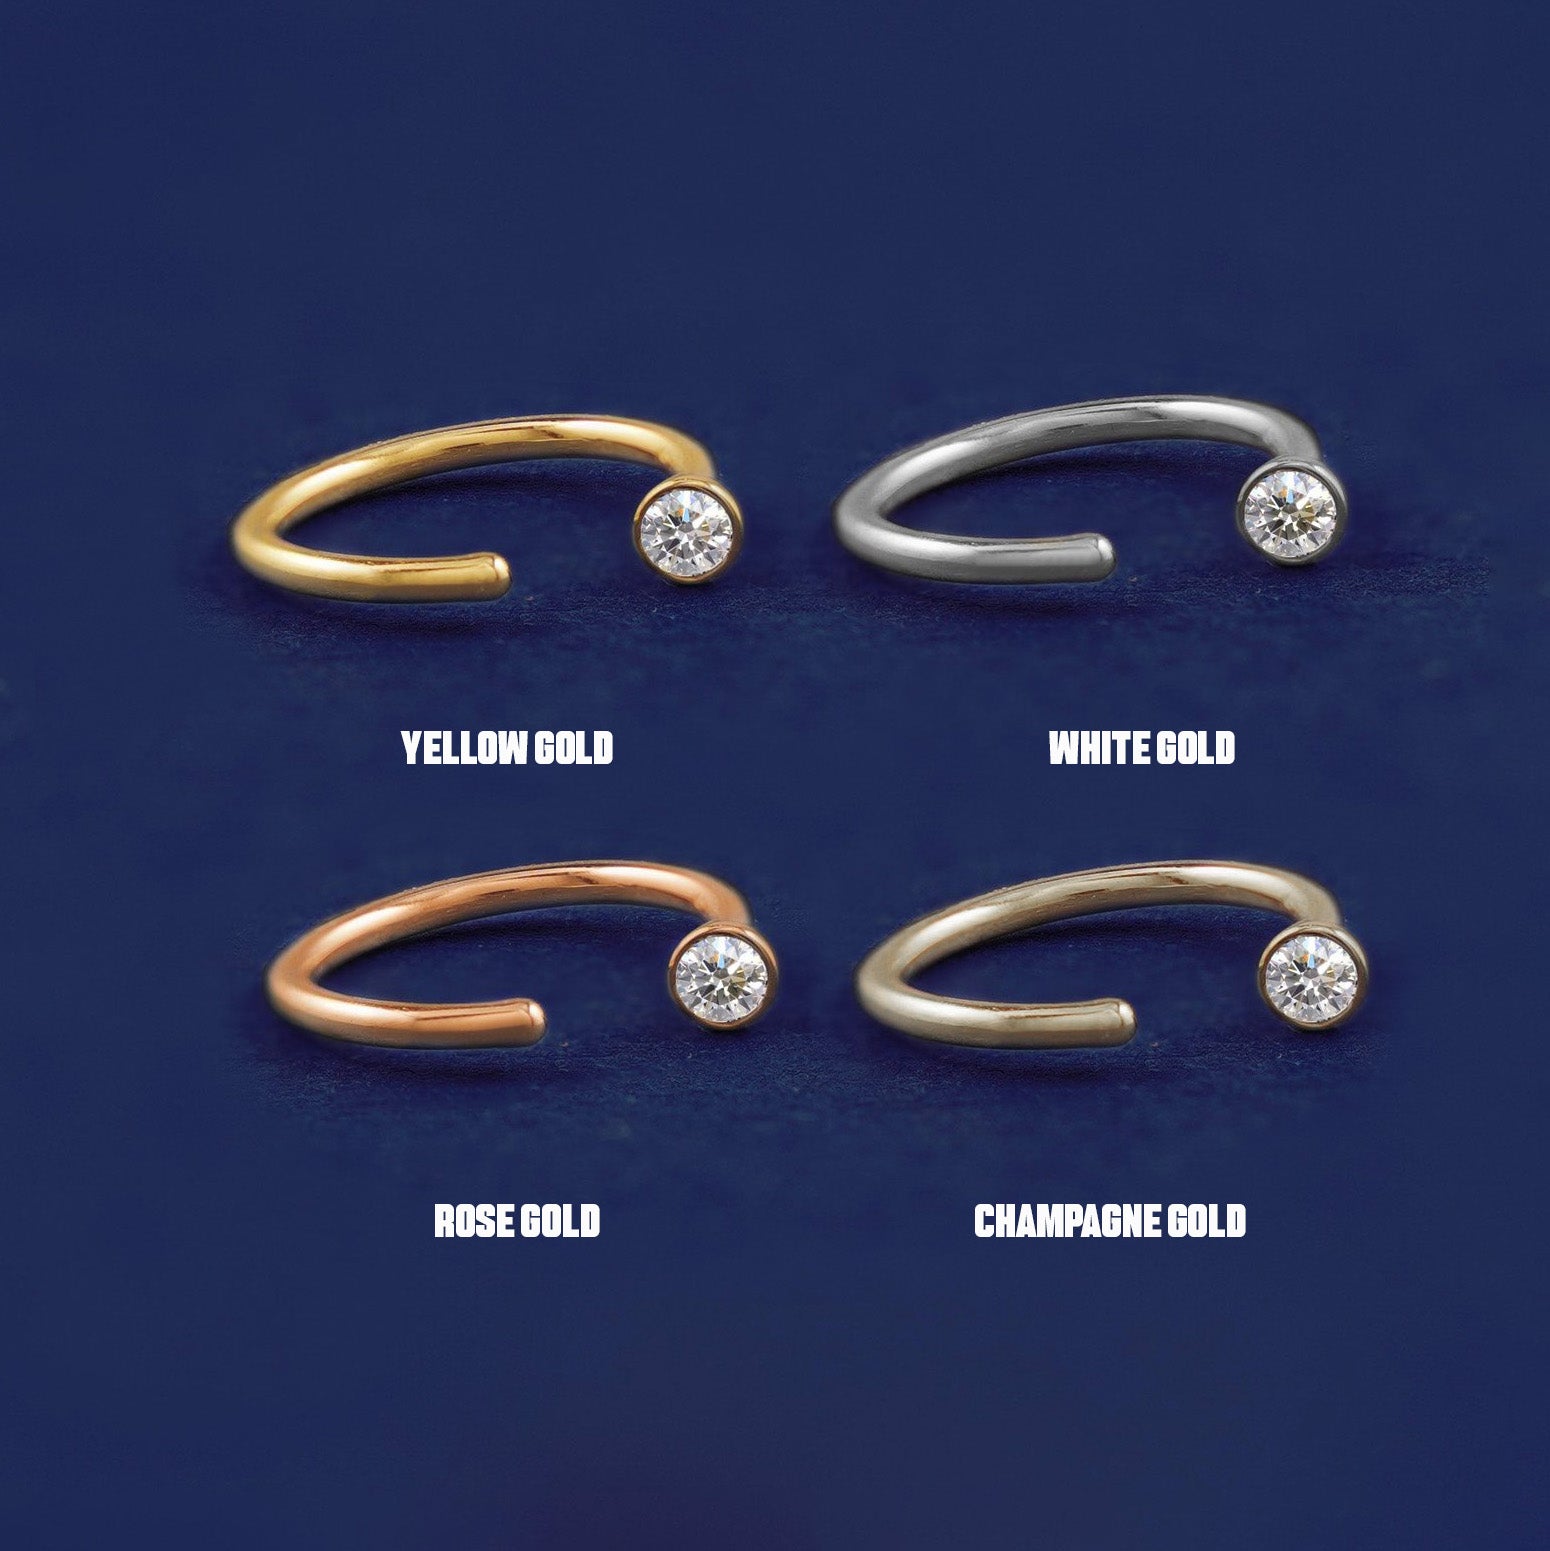 Four versions of the Diamond Open Hoop shown in options of yellow, white, rose and champagne gold